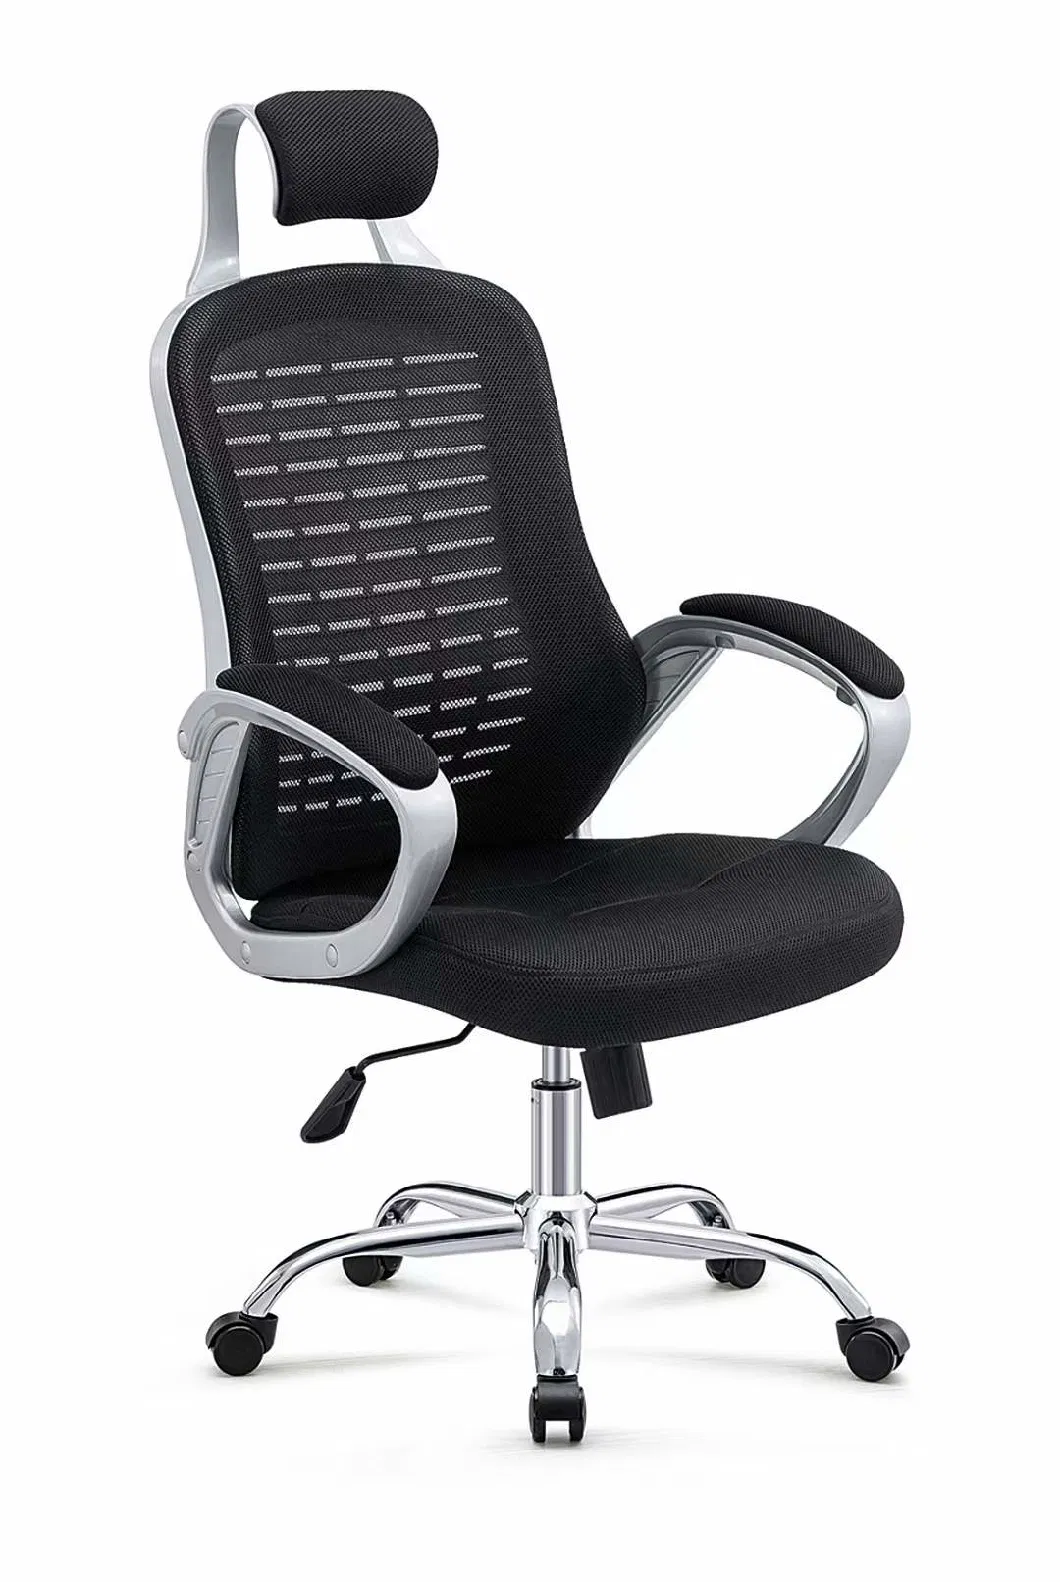 Adjustable Office Chair Executive Desk Gaming Ergonomic High Back Chair